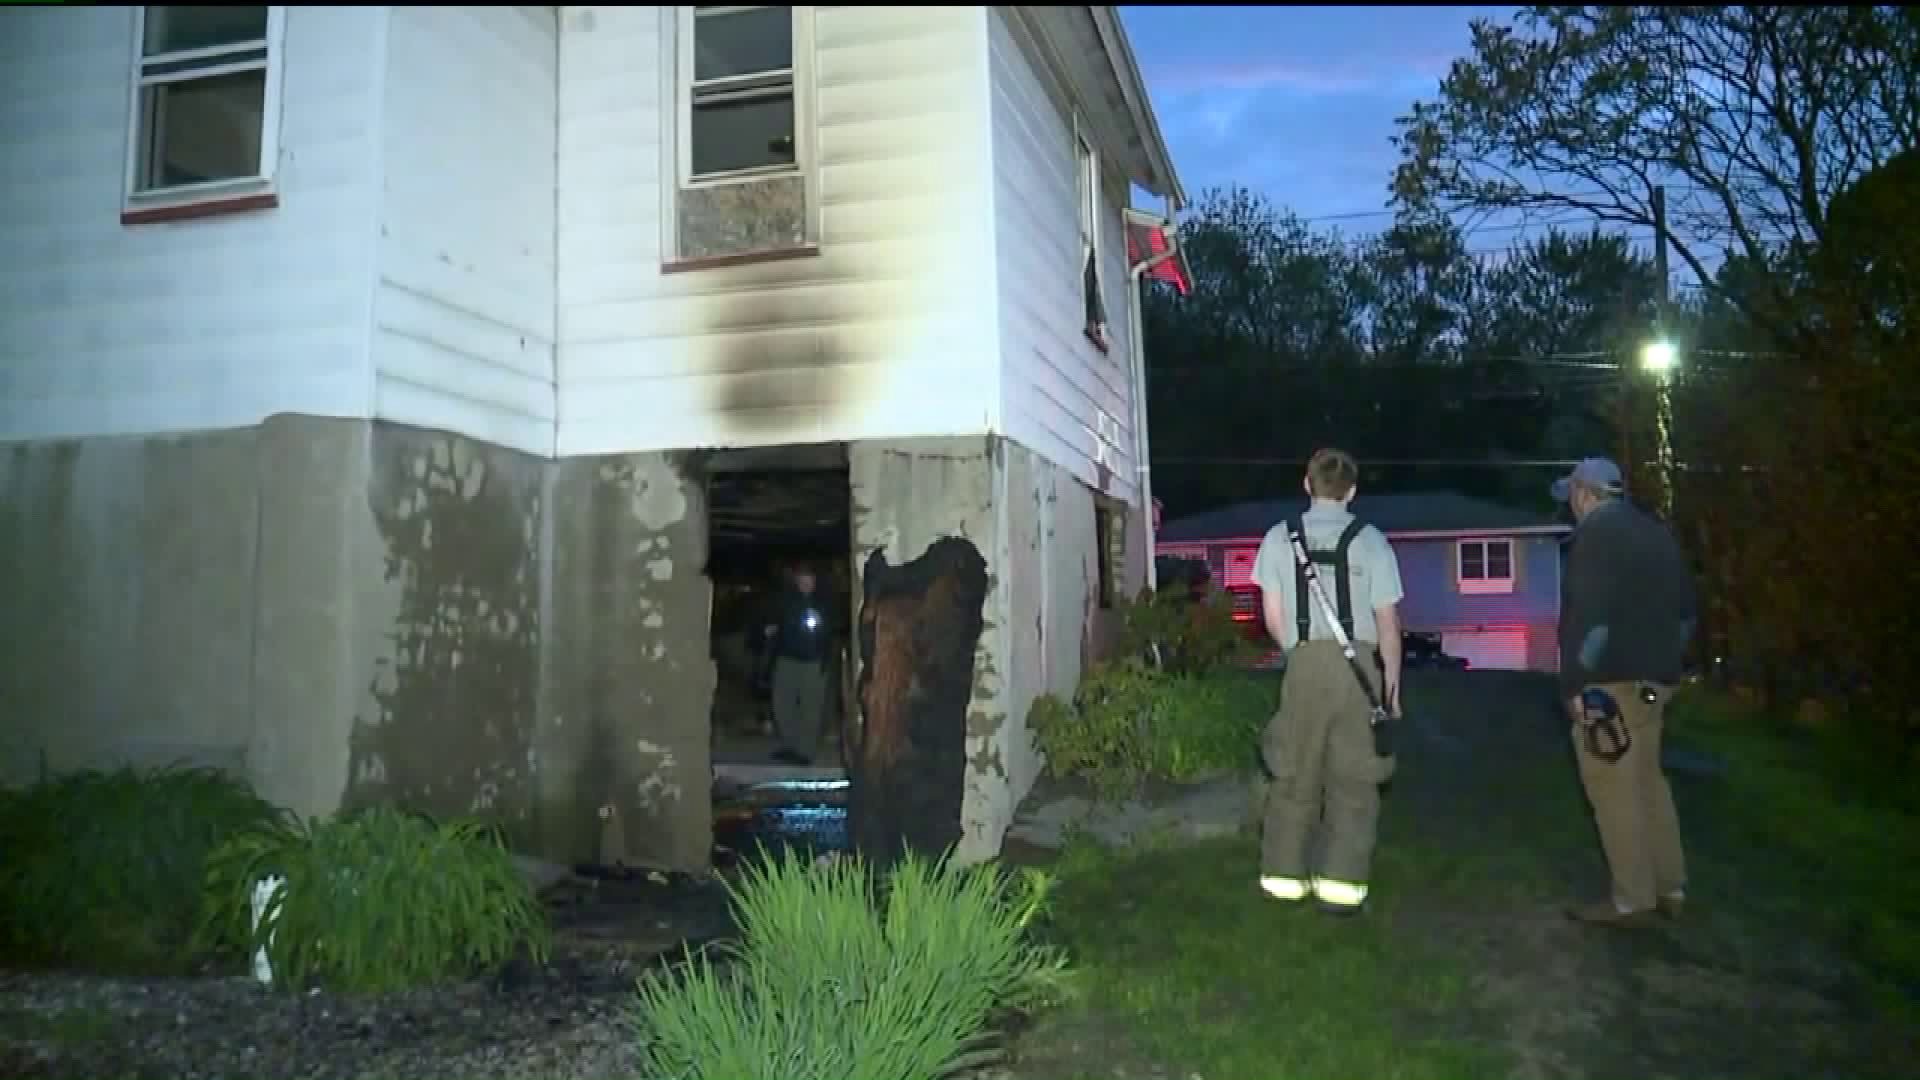 Fire at Vacant House Considered Suspicious